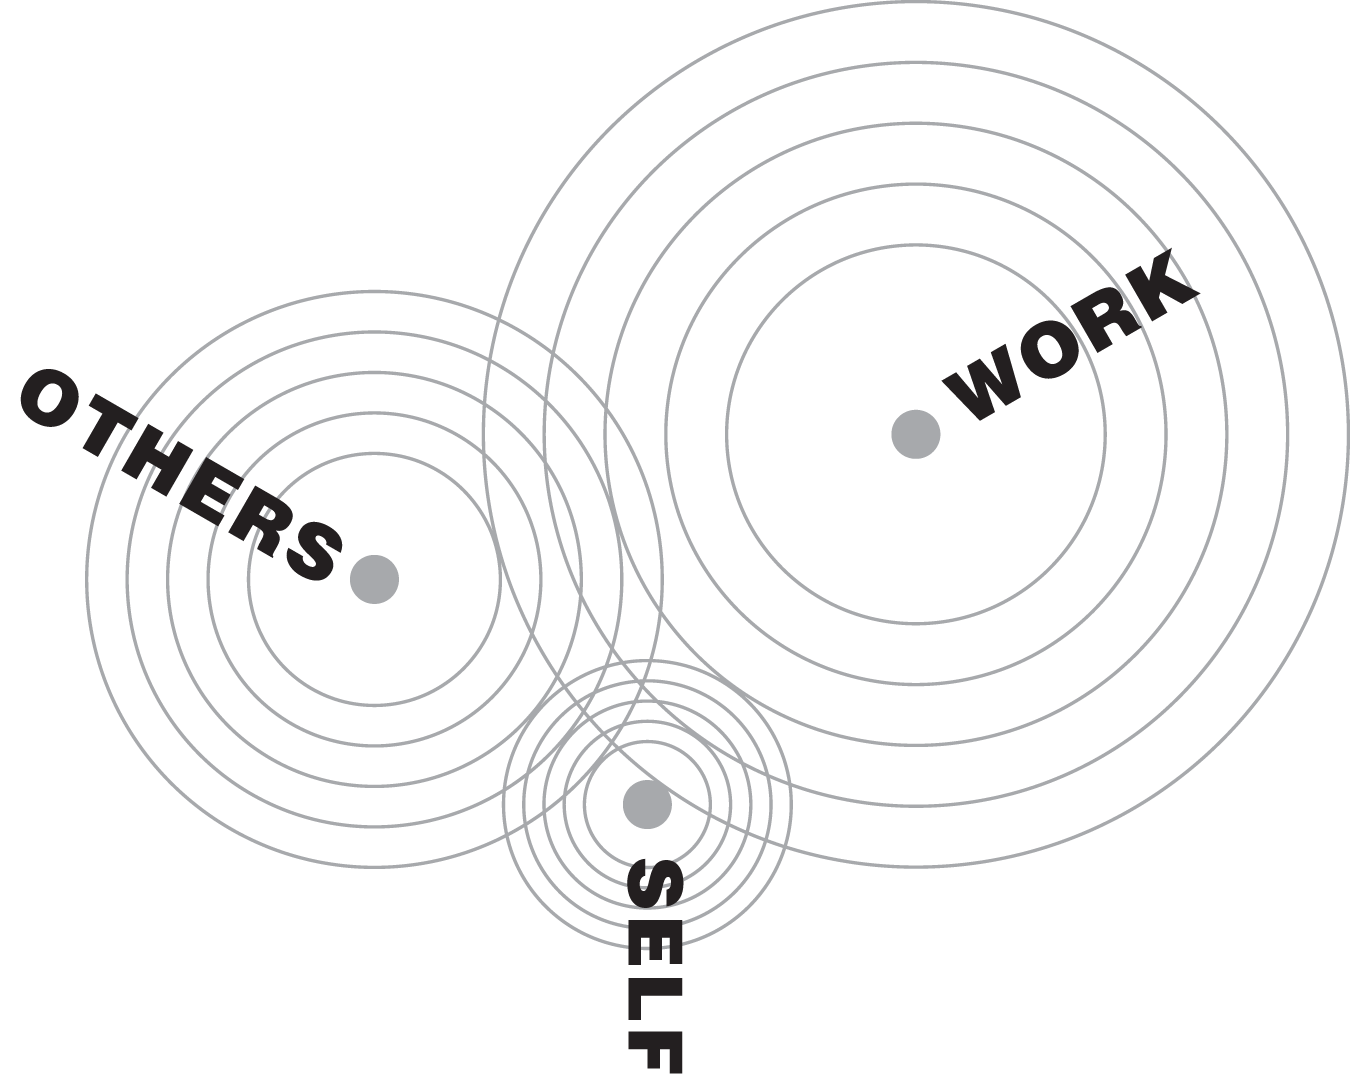 Schematic illustration of Three Core Relationships.